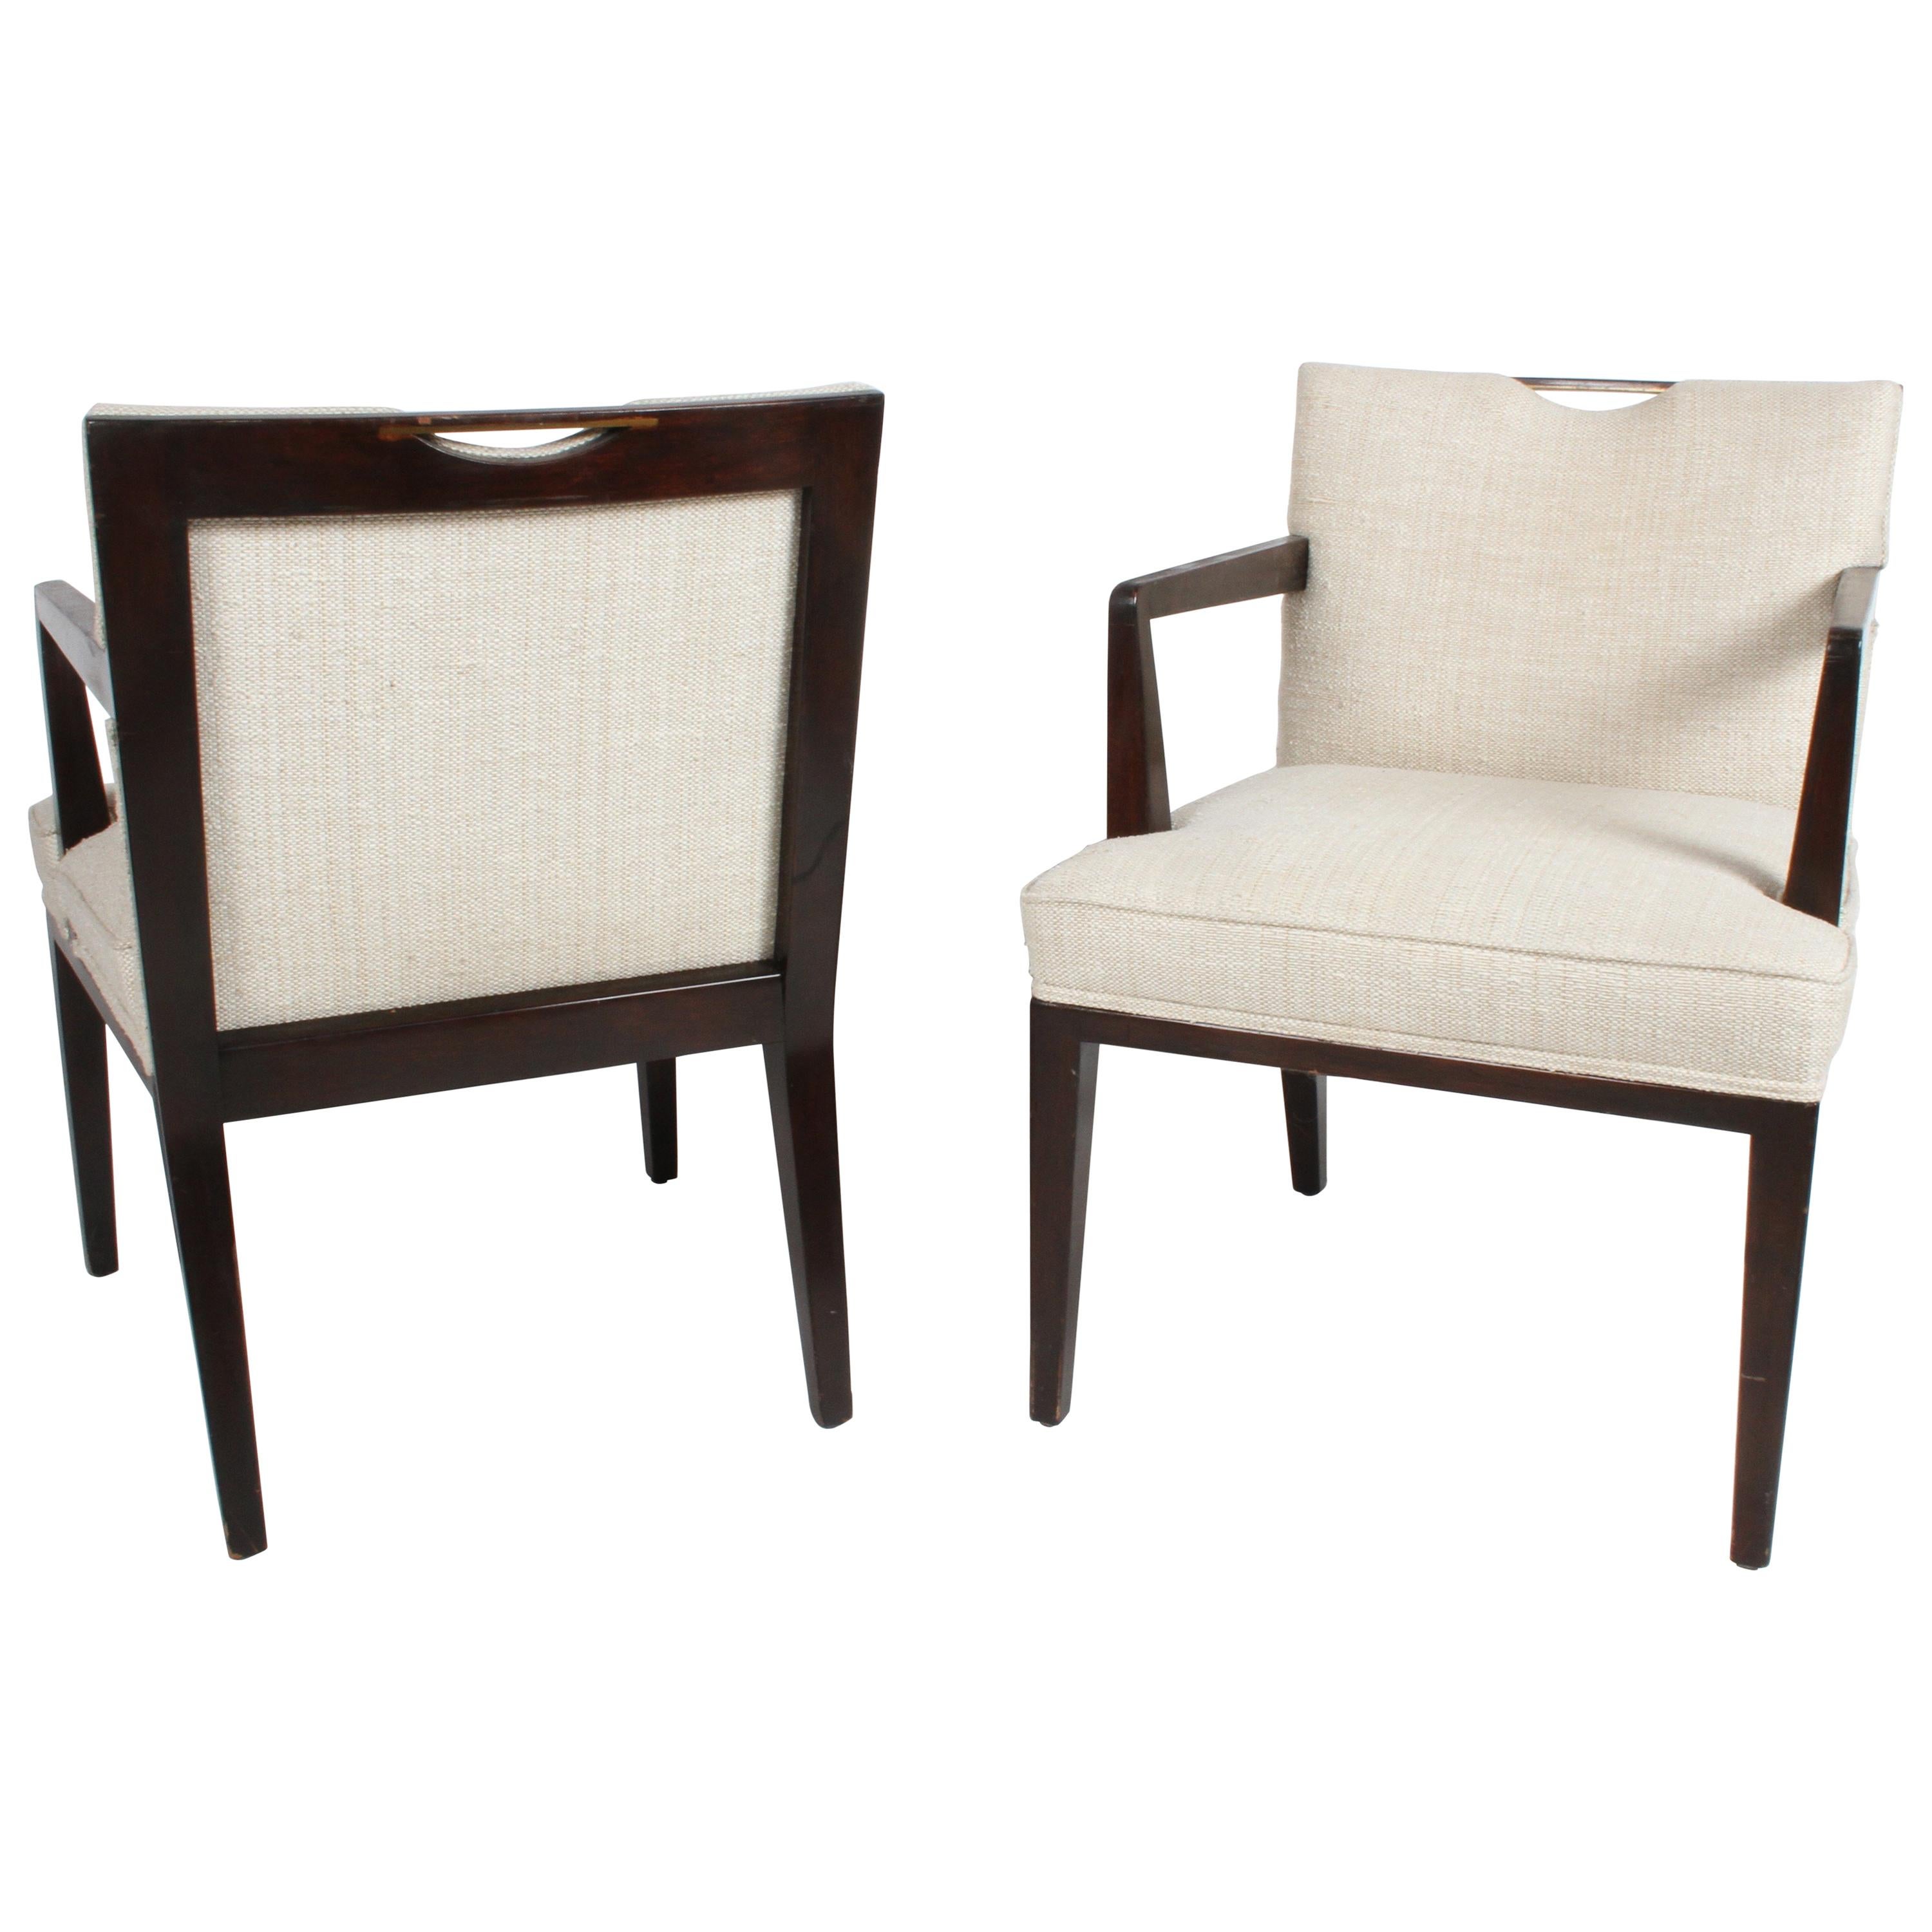 Pair of Edward Wormley for Dunbar Dining Chairs with Brass Handles 